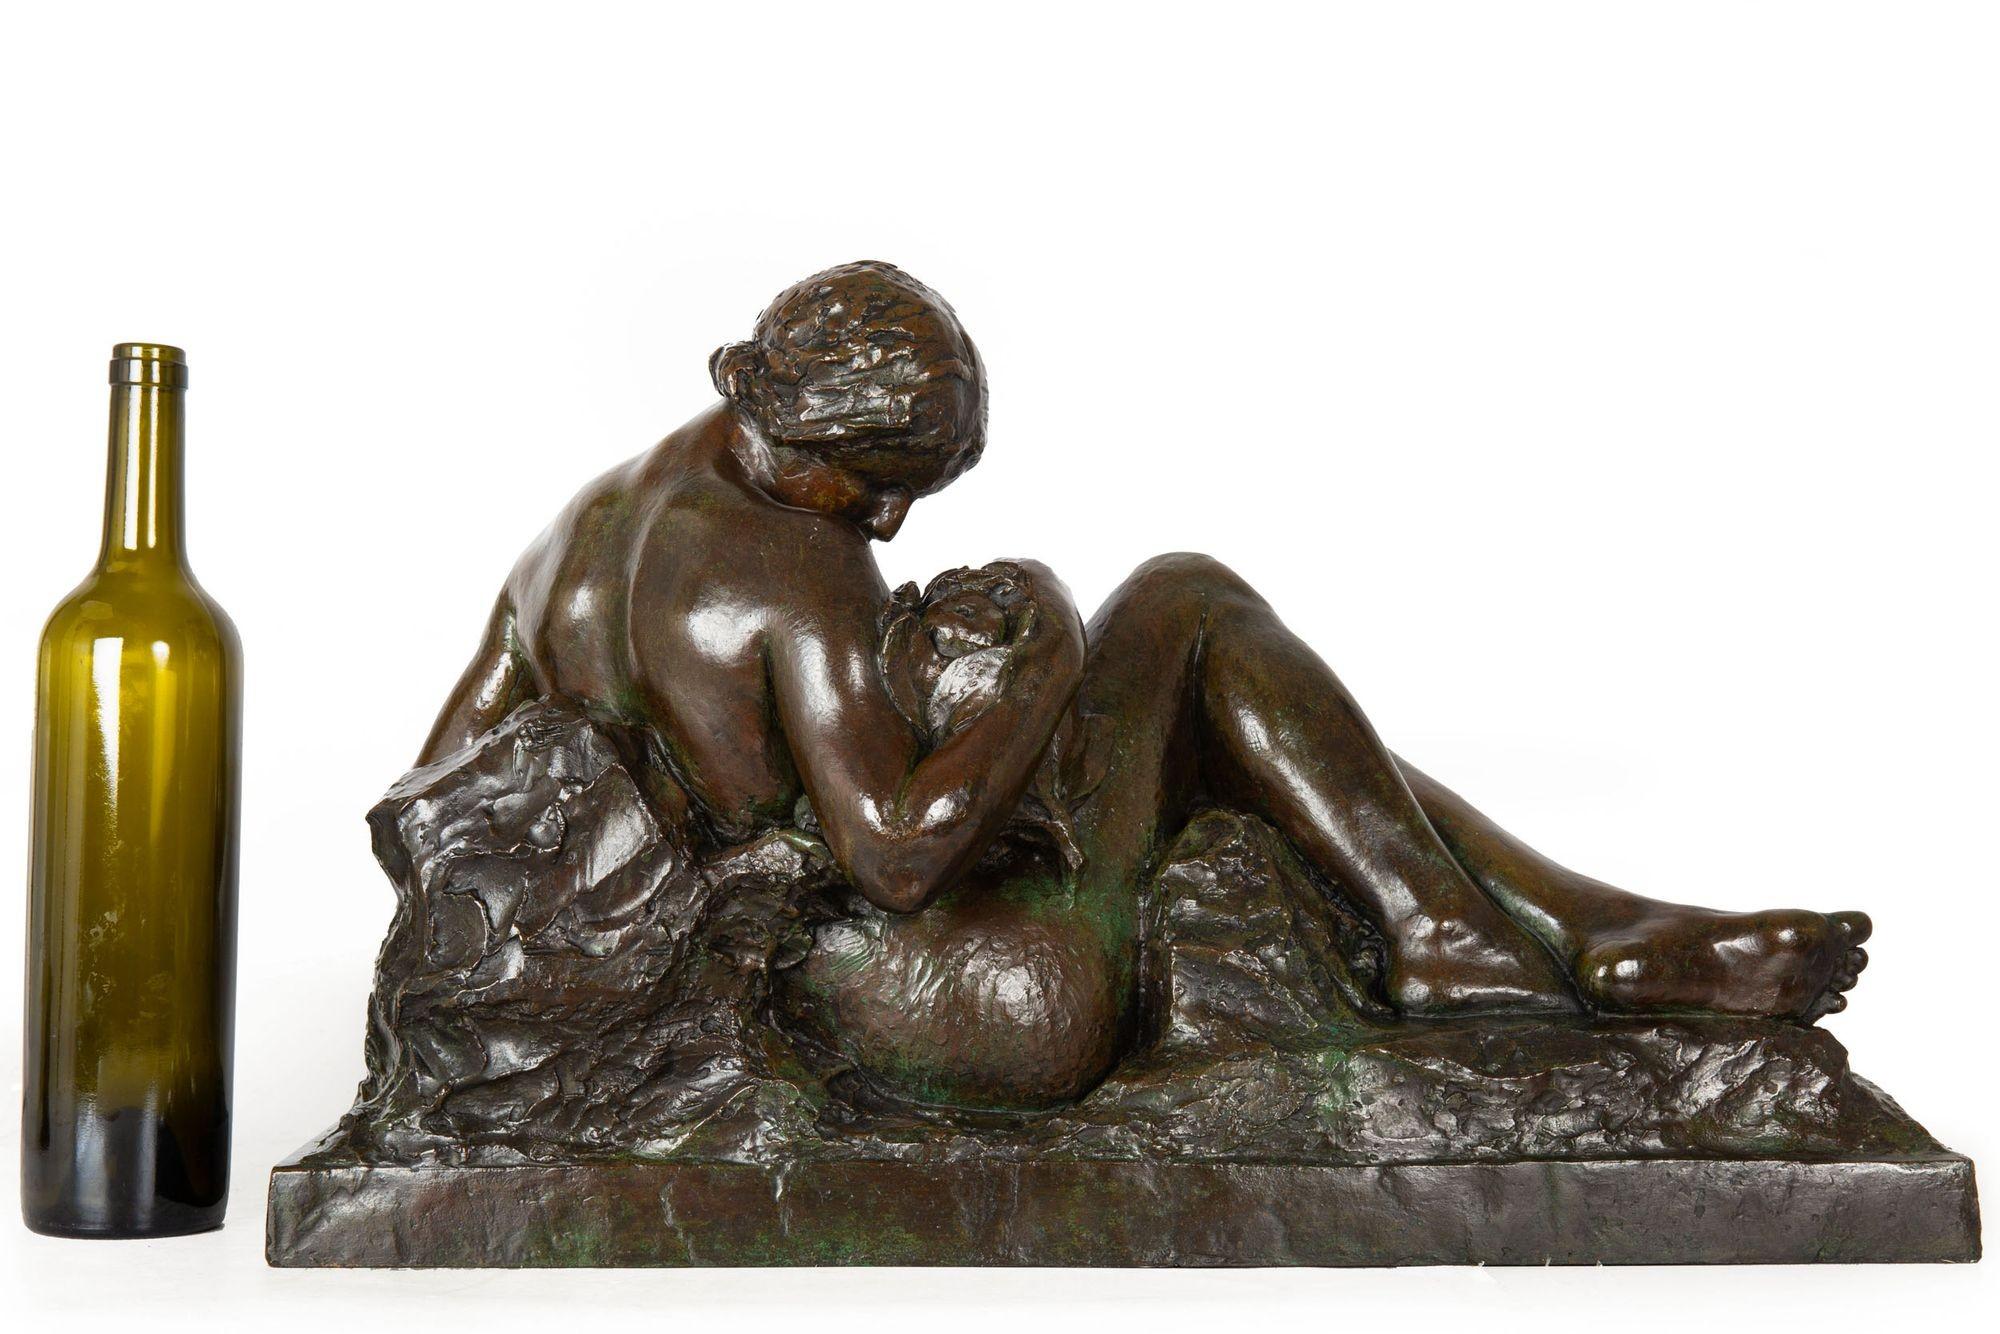 Rare French Modernist Bronze Sculpture of “Eve” (1937) by Aime Octobre In Good Condition For Sale In Shippensburg, PA